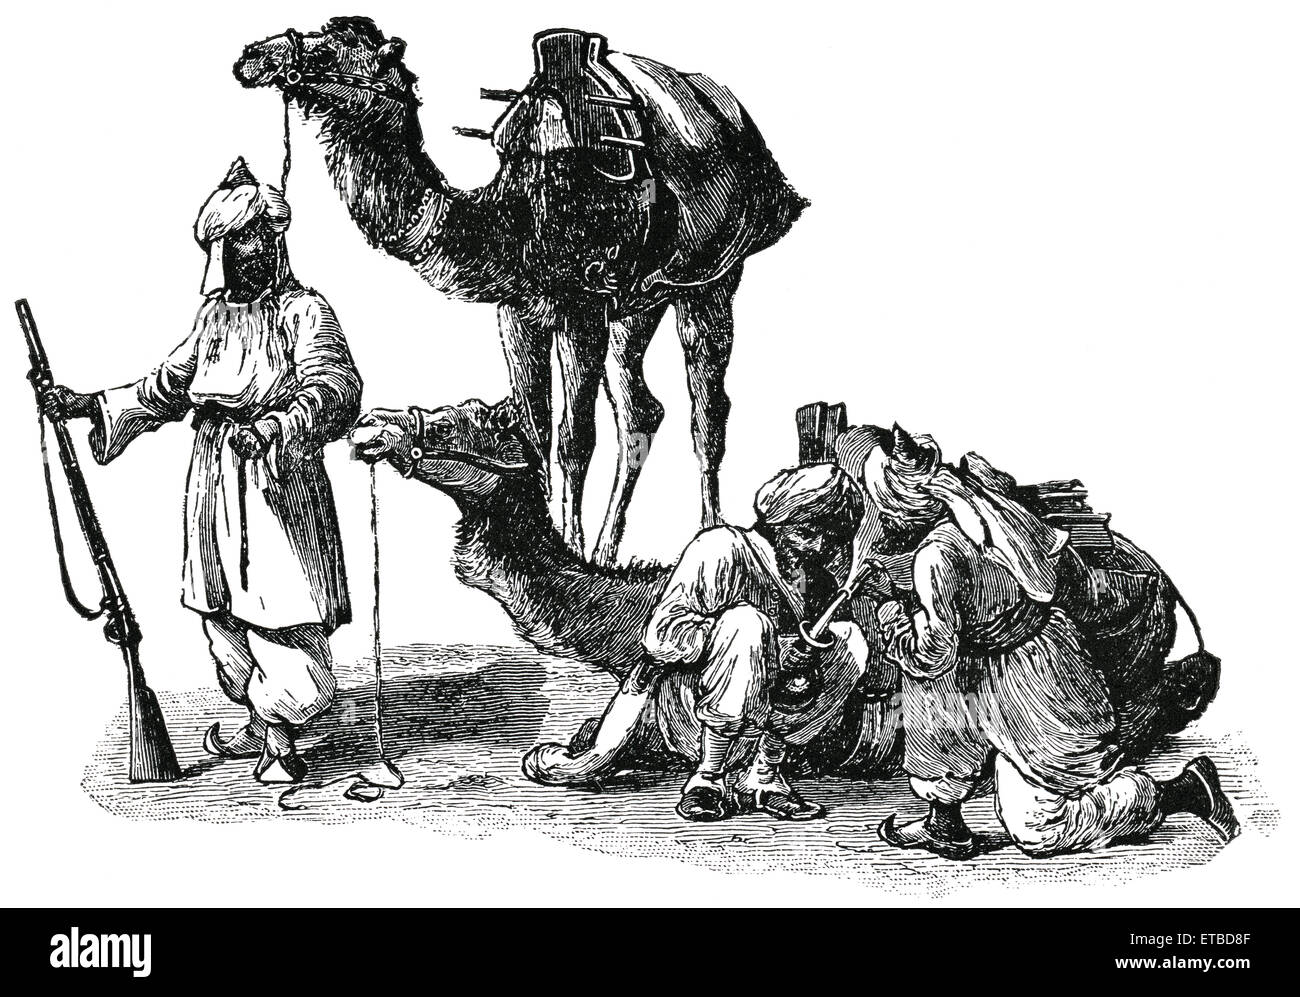 Raiding Nomads with Camels, Afghanistan, 'Classical Portfolio of Primitive Carriers', by Marshall M. Kirman, World Railway Publ. Co., Illustration, 1895 Stock Photo